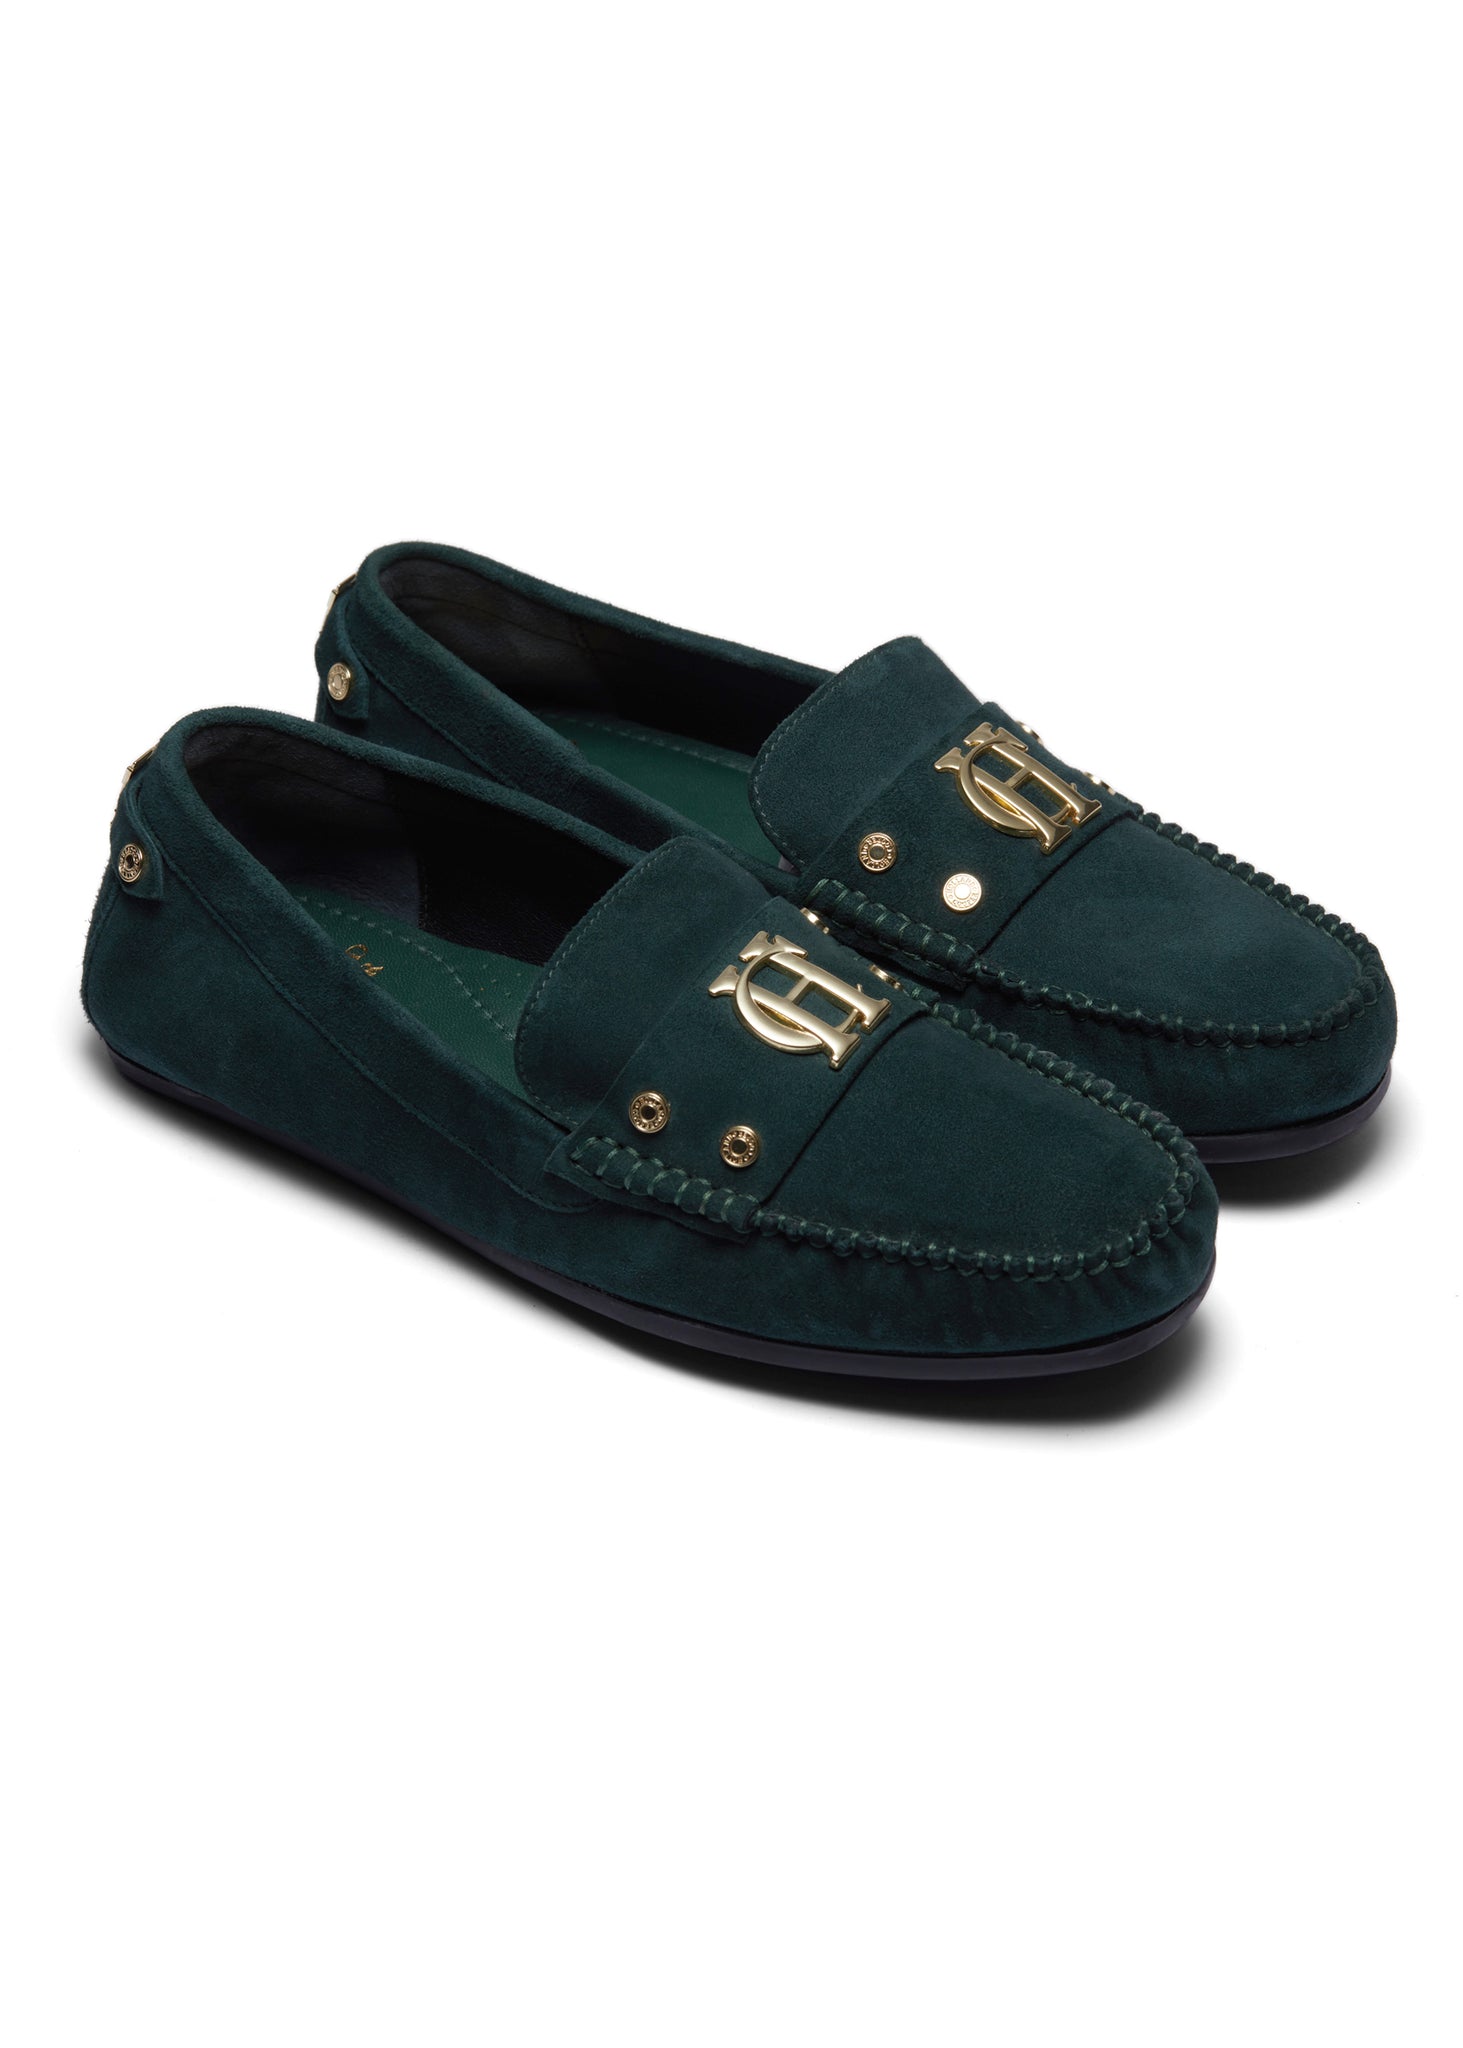 classic emerald green suede loafers with a leather sole and top stitching details and gold hardware with a dark green inner sole